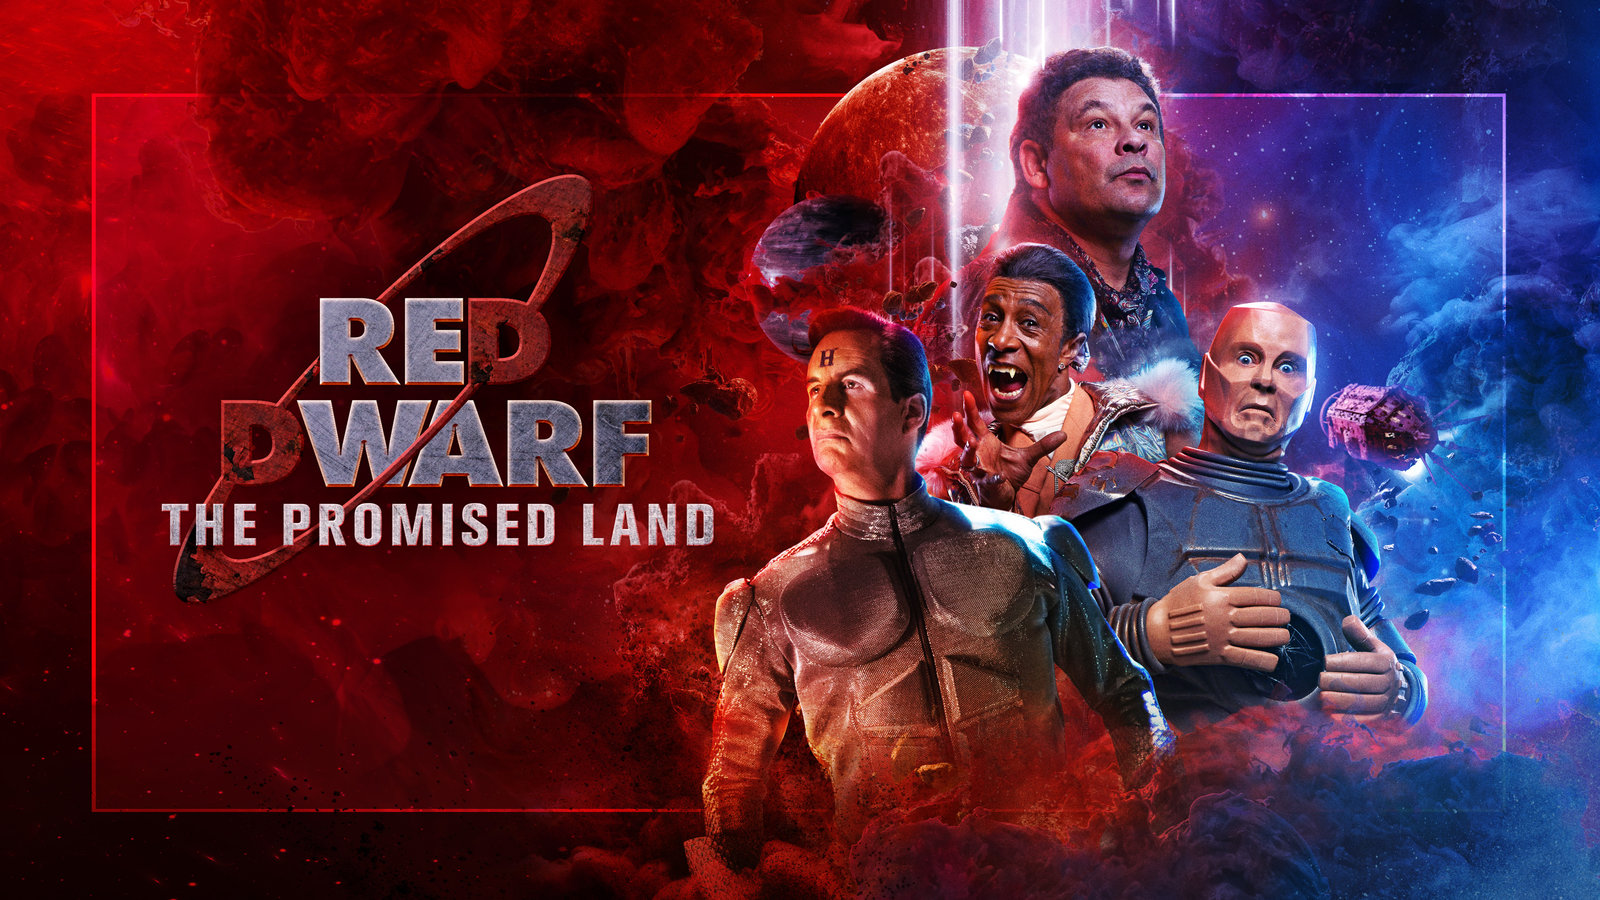 Red Dwarf Season 13 Review: Made A Huge Mistake With The Promised